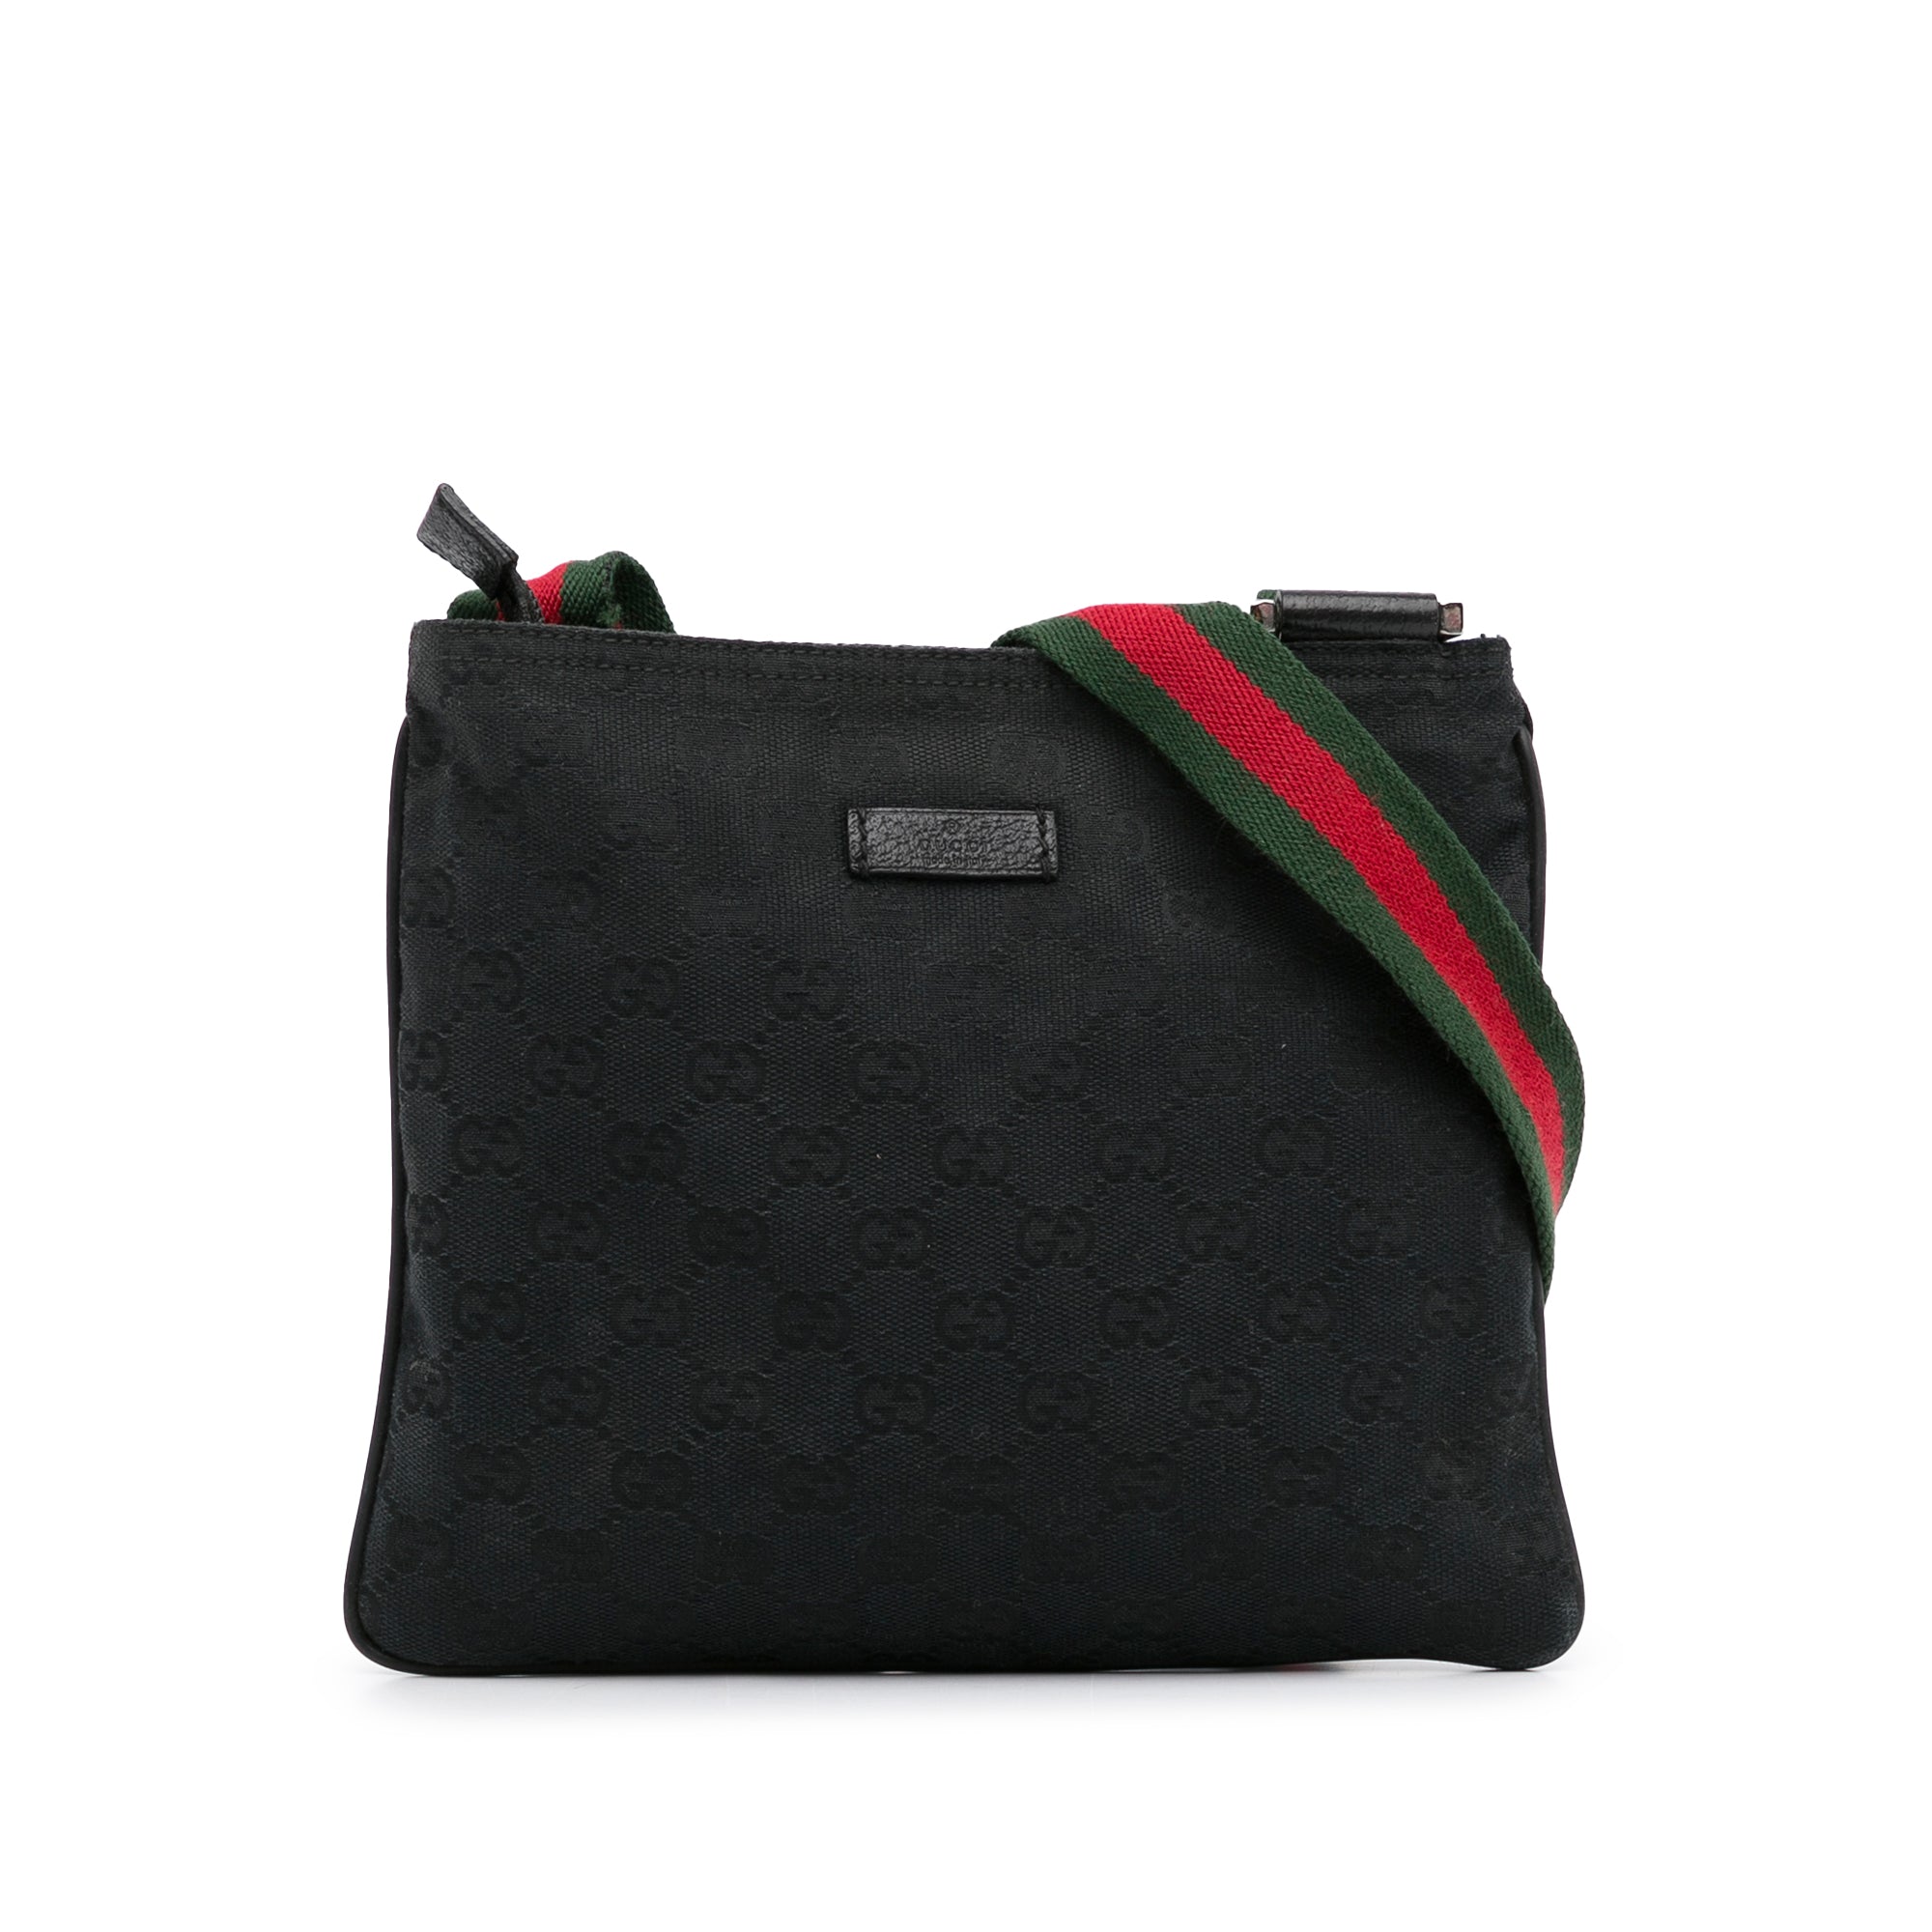 GUCCI Sherry GG Nylon Leather Tote Bag Hand Bag Black 293592, RvceShops  Revival